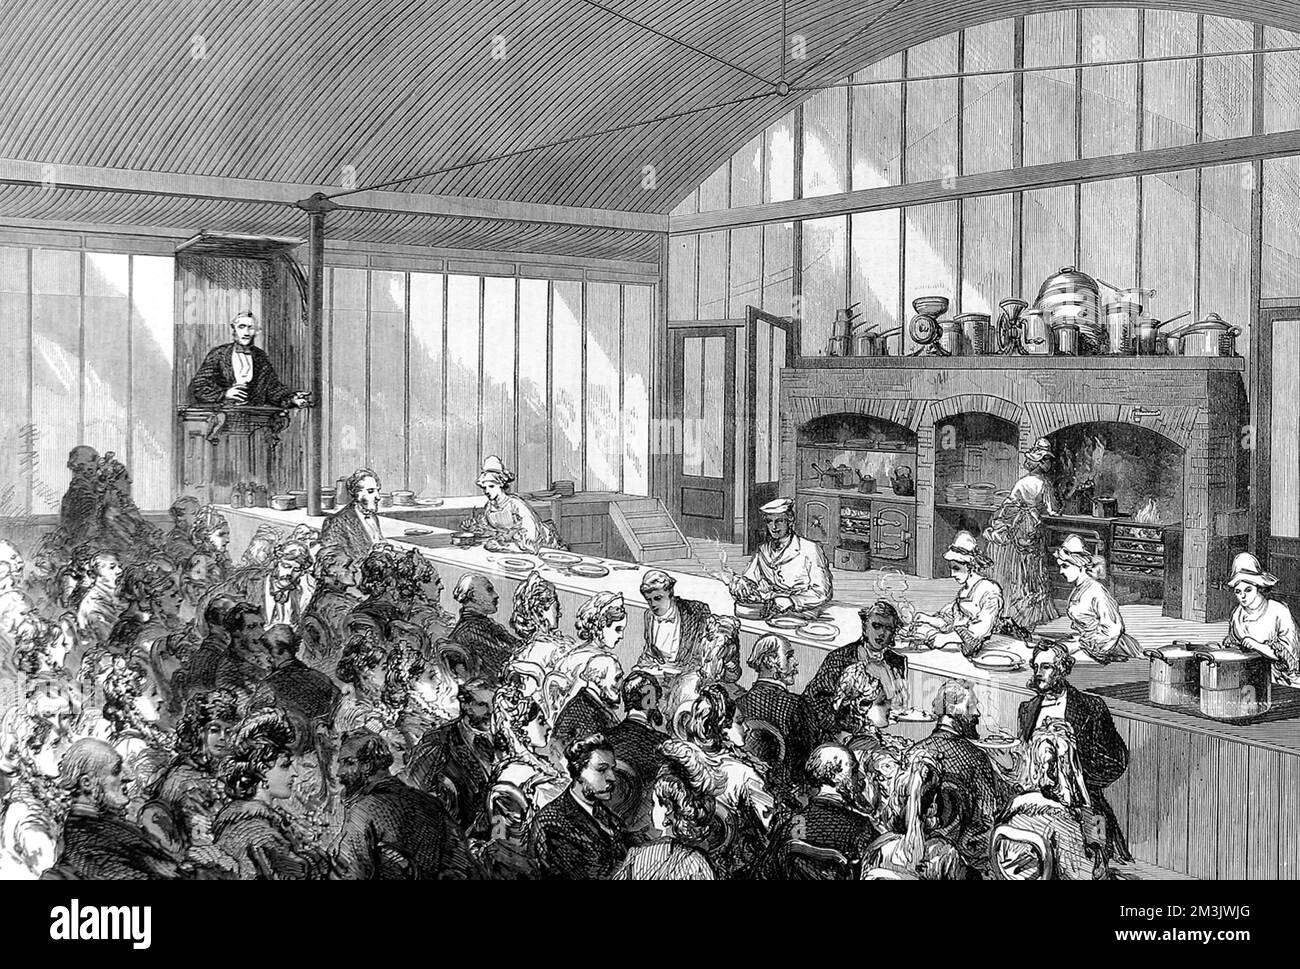 Lecture on cookery attended by a well-heeled crowd at the London International Exhibition of 1873. The short lectures, by Mr Buckmaster, accompanied demonstrations of the best methods of cooking different kinds of food. Guests could, on payment of a small fee, taste the prepared dishes. Queen Victoria attended one of Mr Buckmaster's lectures, and tasted an omelette fine herbes before inspecting German military cooking apparatus.  1873 Stock Photo